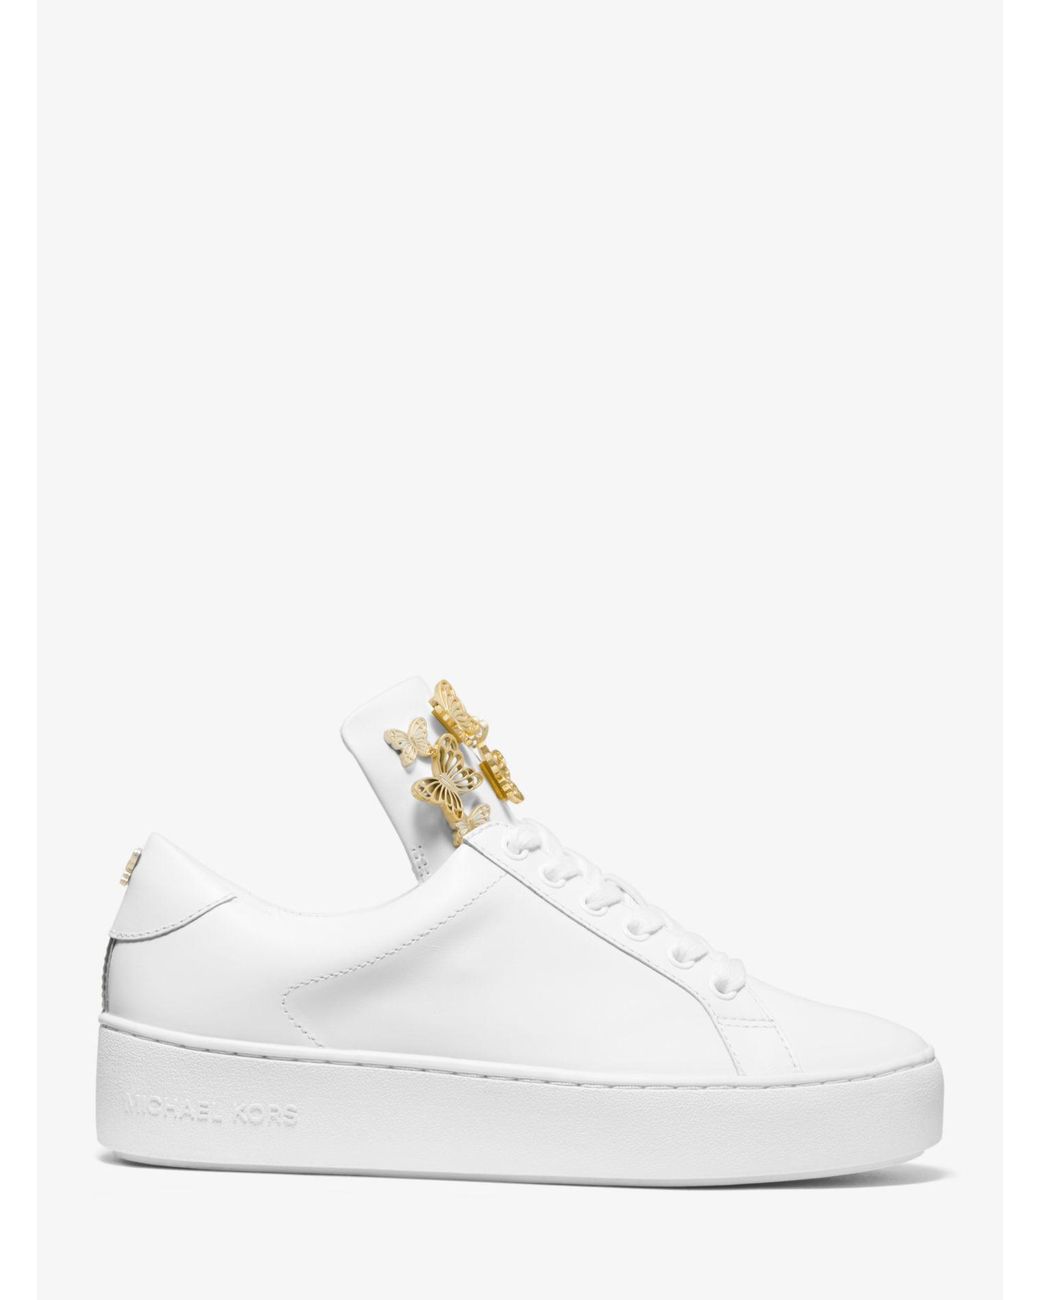 height captain the first Michael Kors Mindy Butterfly Appliqué Leather Sneaker in White | Lyst